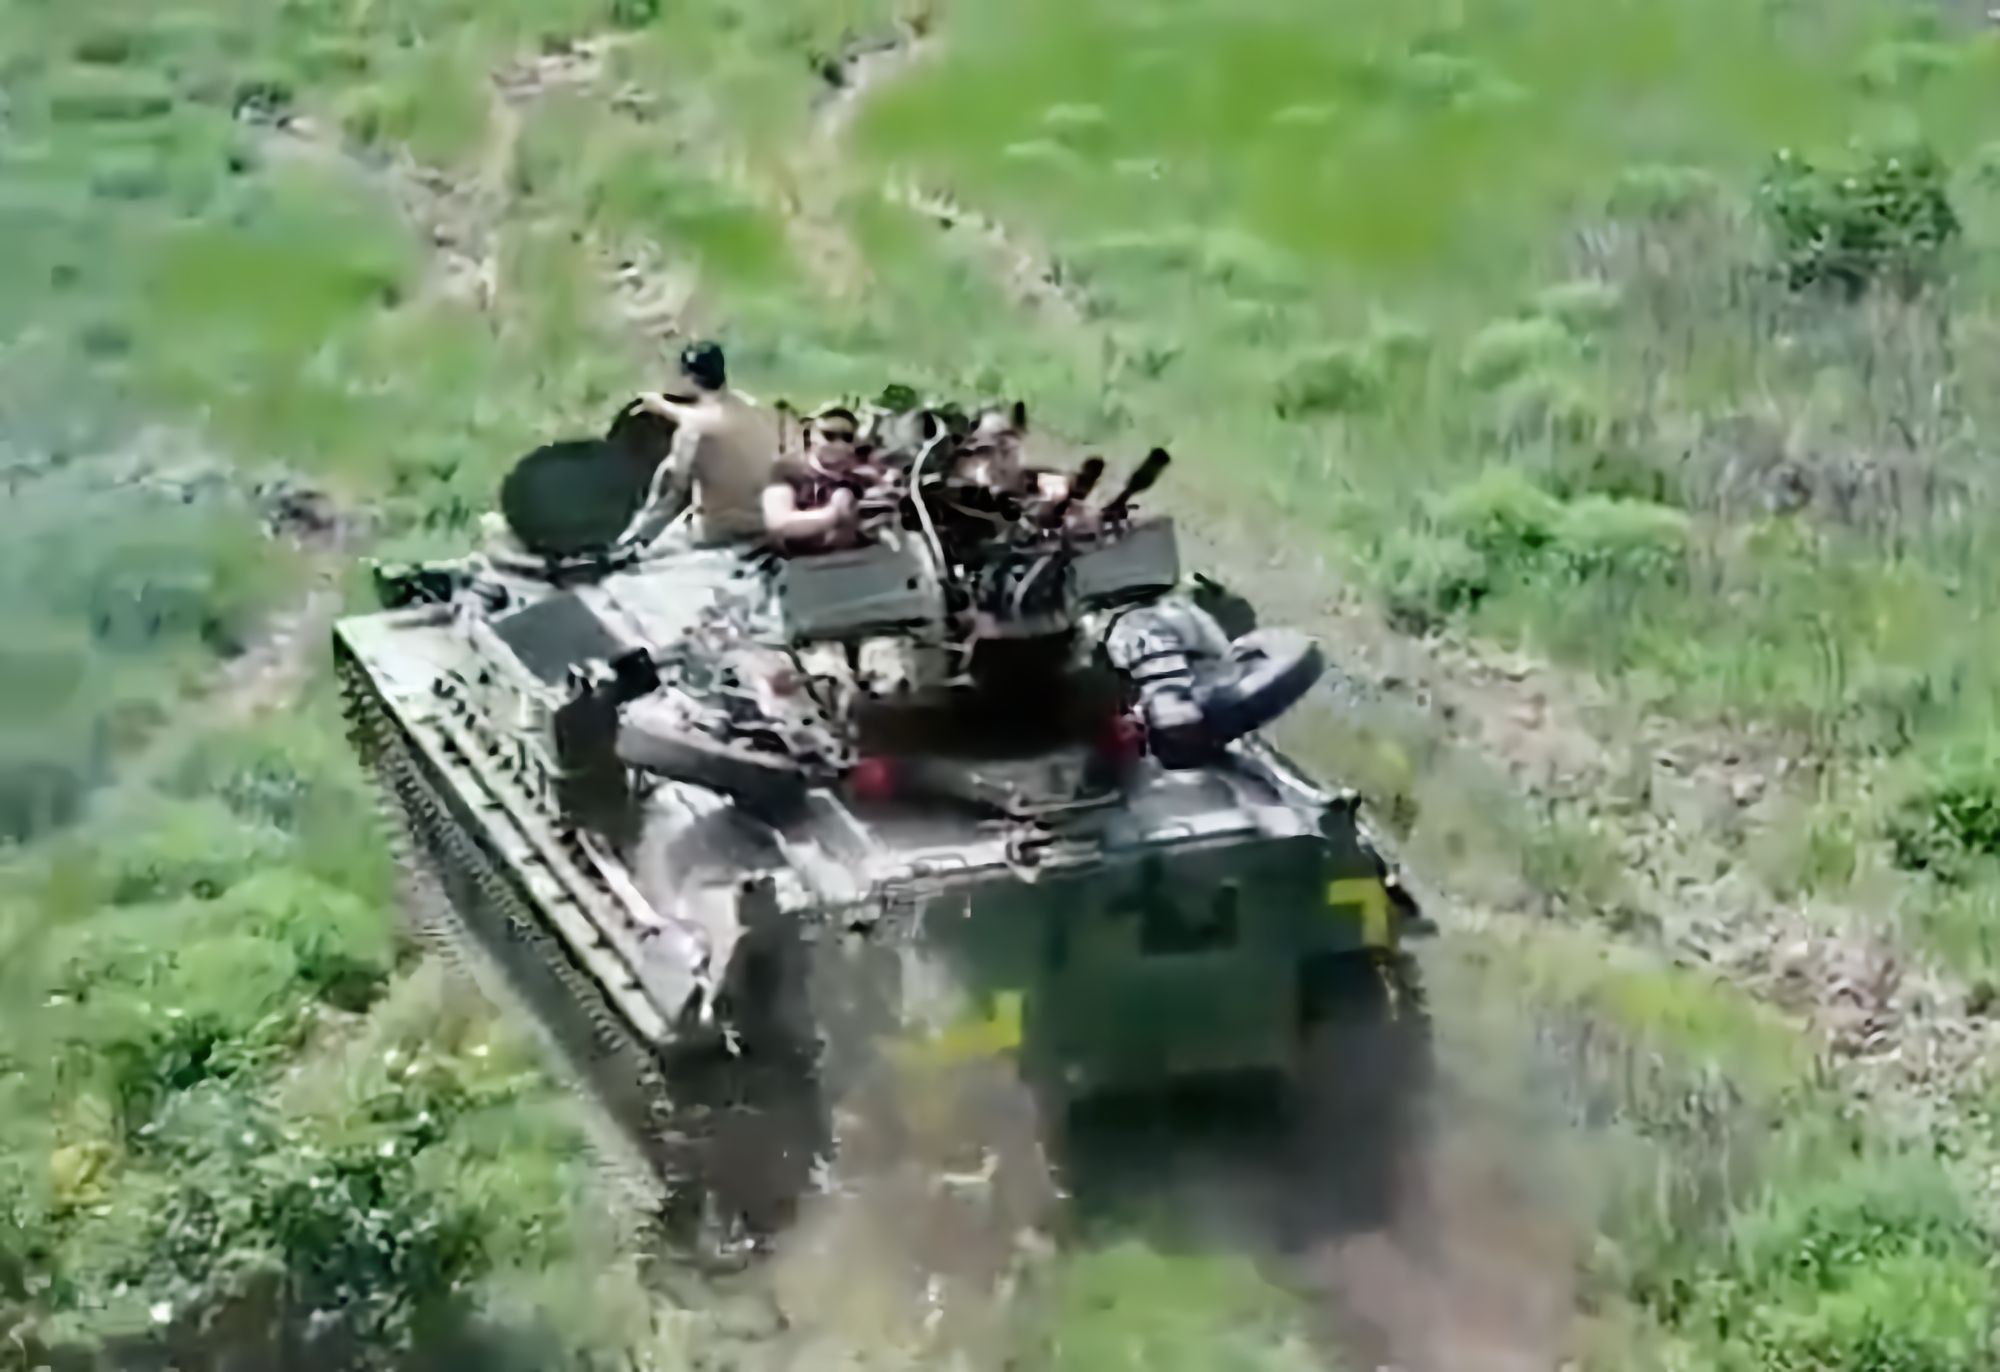 The Ukrainian armed forces seized a Russian MT-LBVM armored personnel carrier, mounted a ZU-23-2 anti-aircraft gun on it, and sent it back to the front